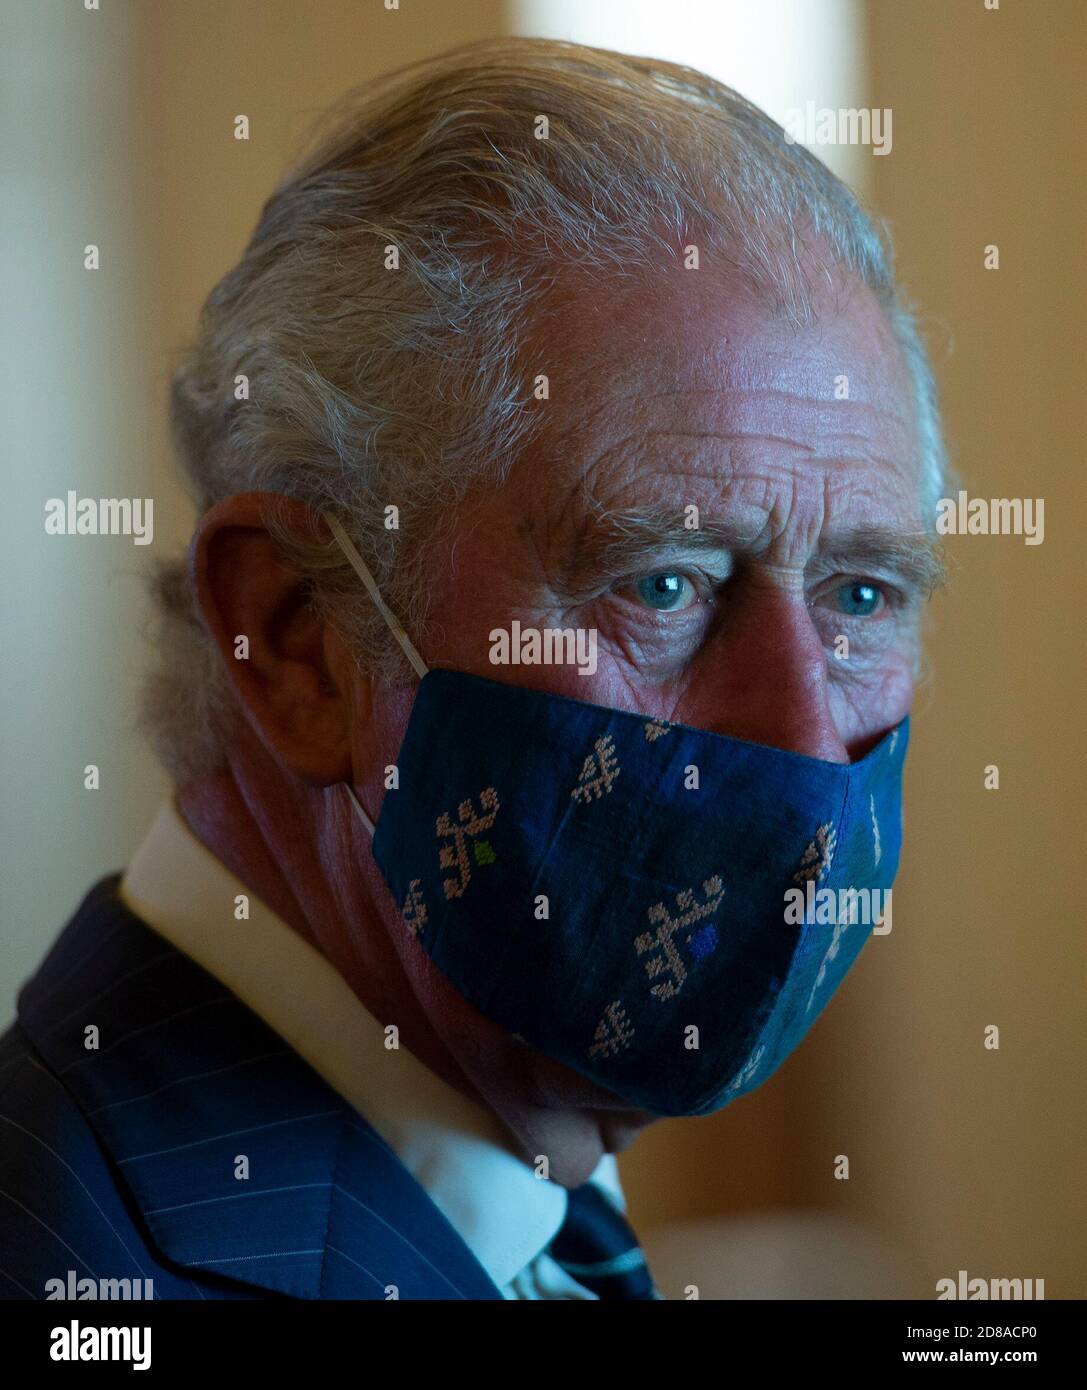 The Prince of Wales during a visit to the headquarters of the Bank of England in the City of London, where they met with Governor Andrew Bailey and reviewed the Bank's role in supporting the national economy through the coronavirus pandemic. Stock Photo